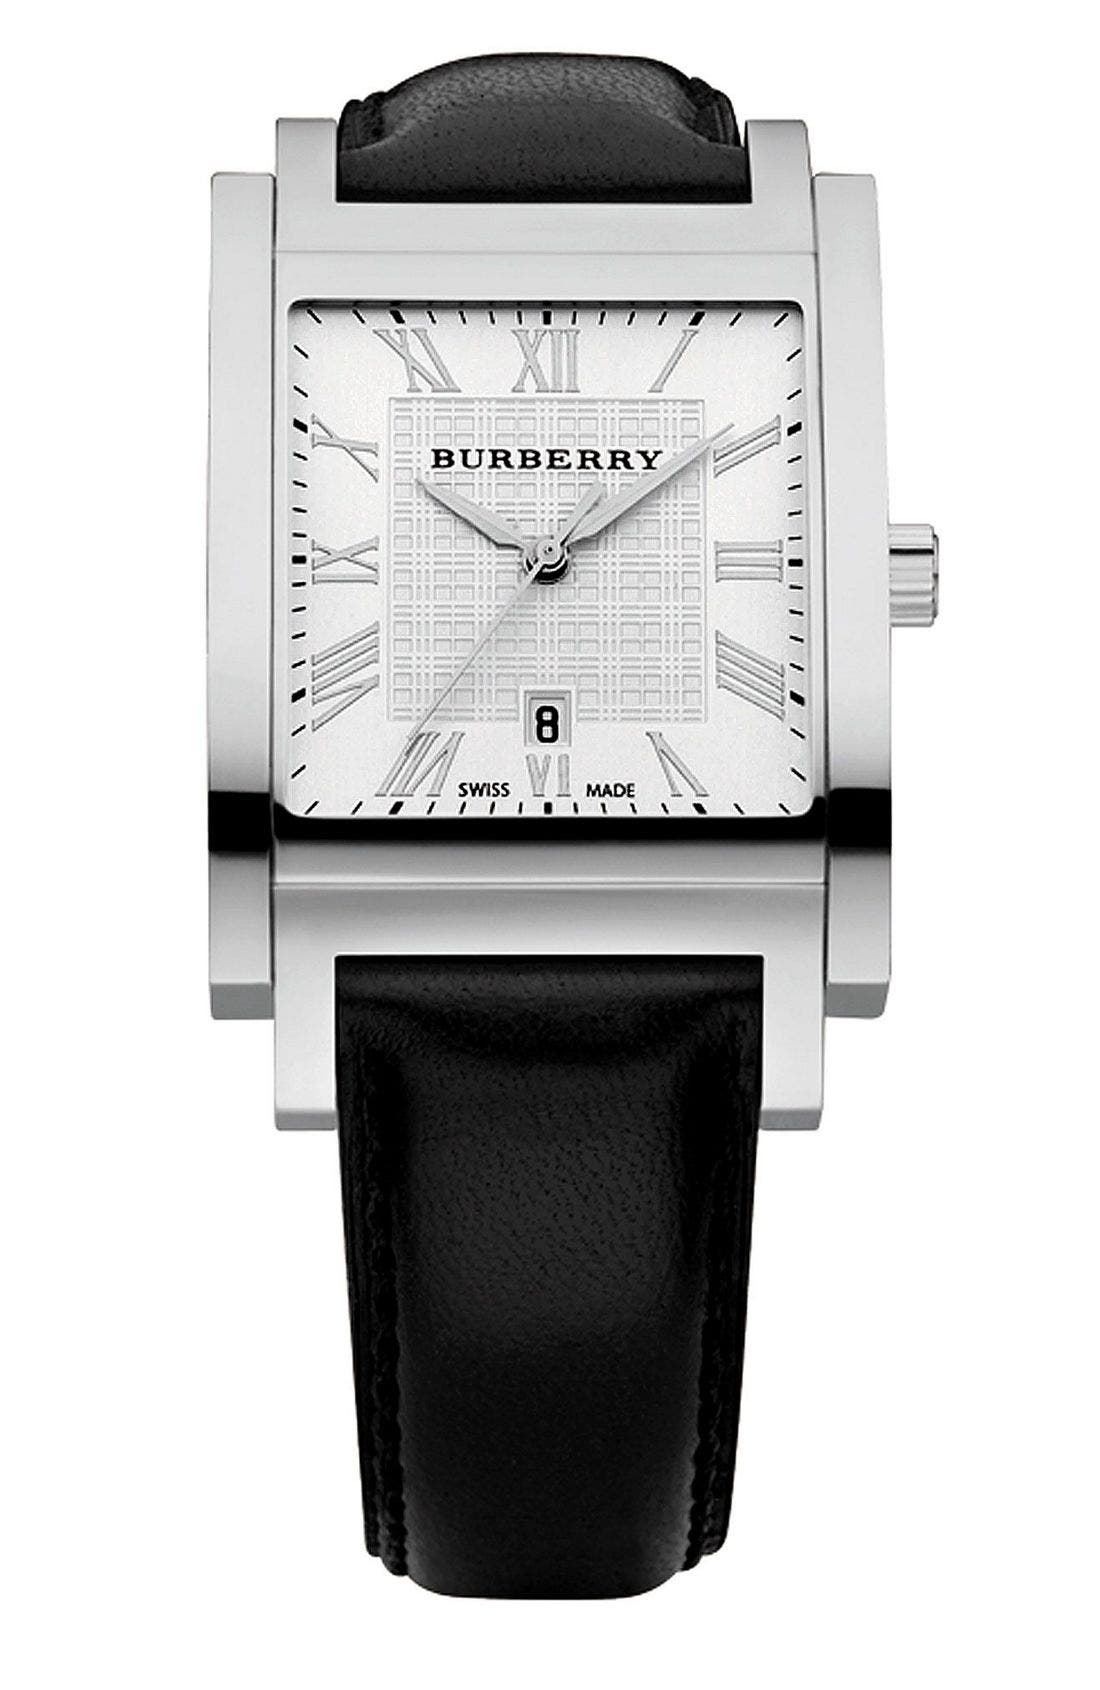 burberry watch square face